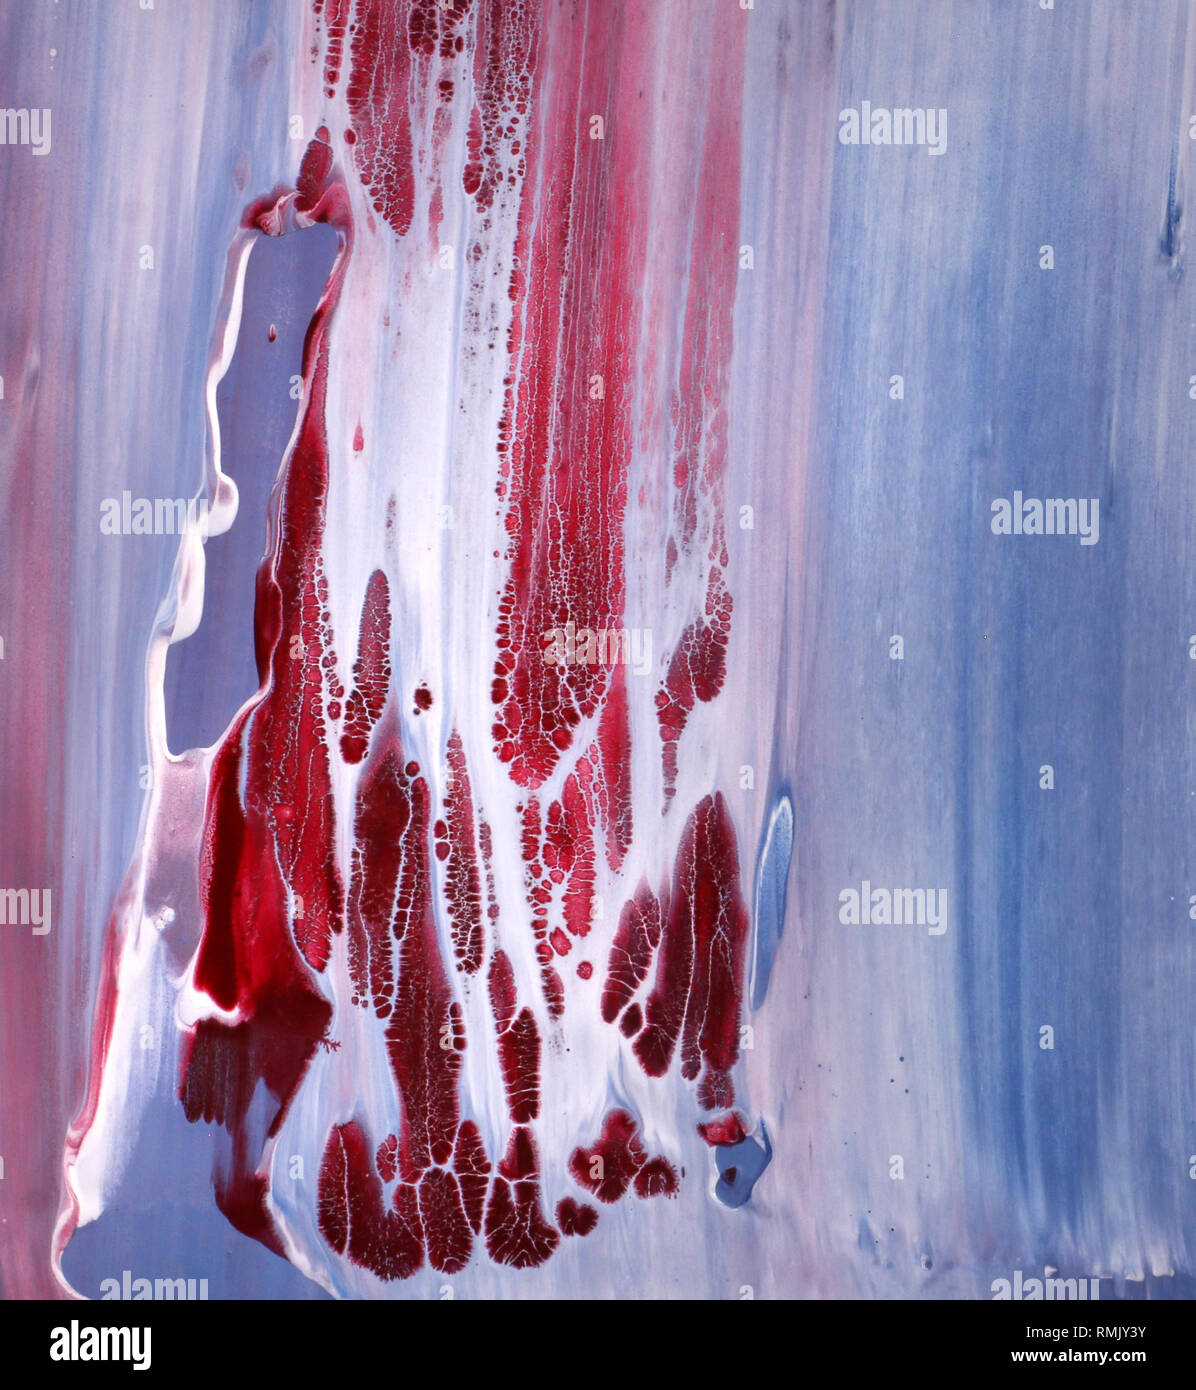 Aesthetic acrylic red and blue illustration Stock Photo